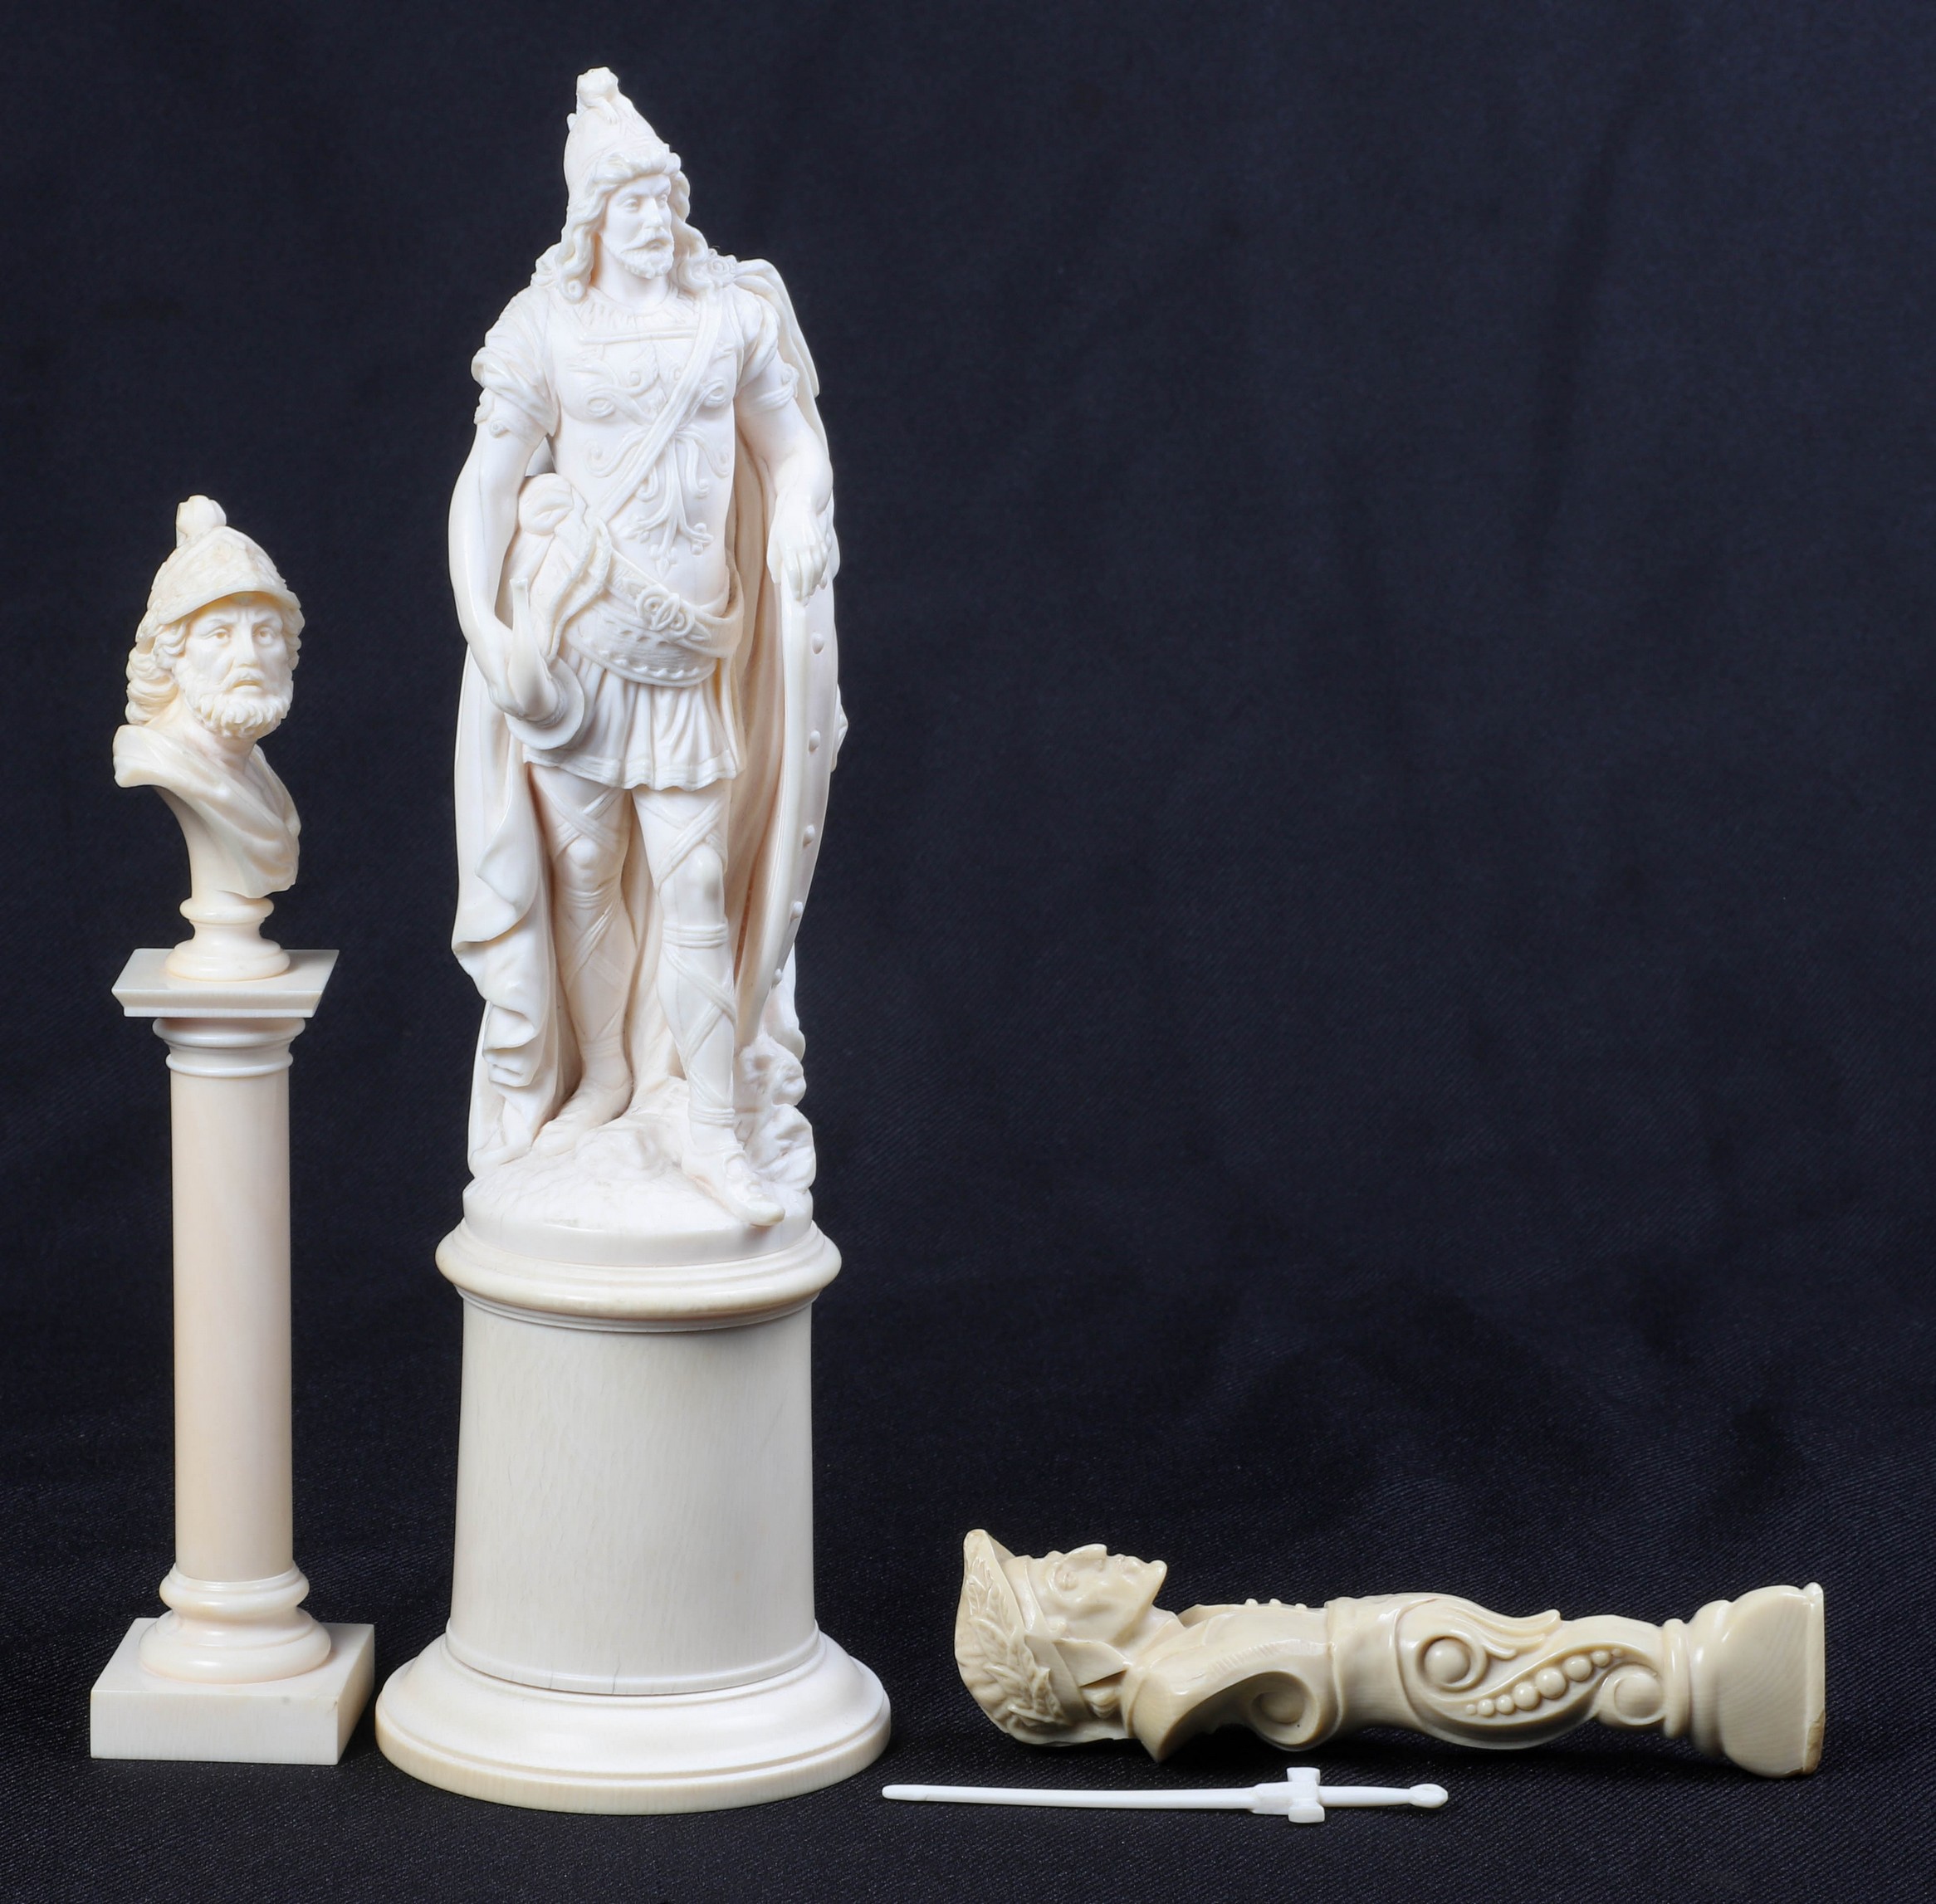 Ivory figure of a Roman, bust and